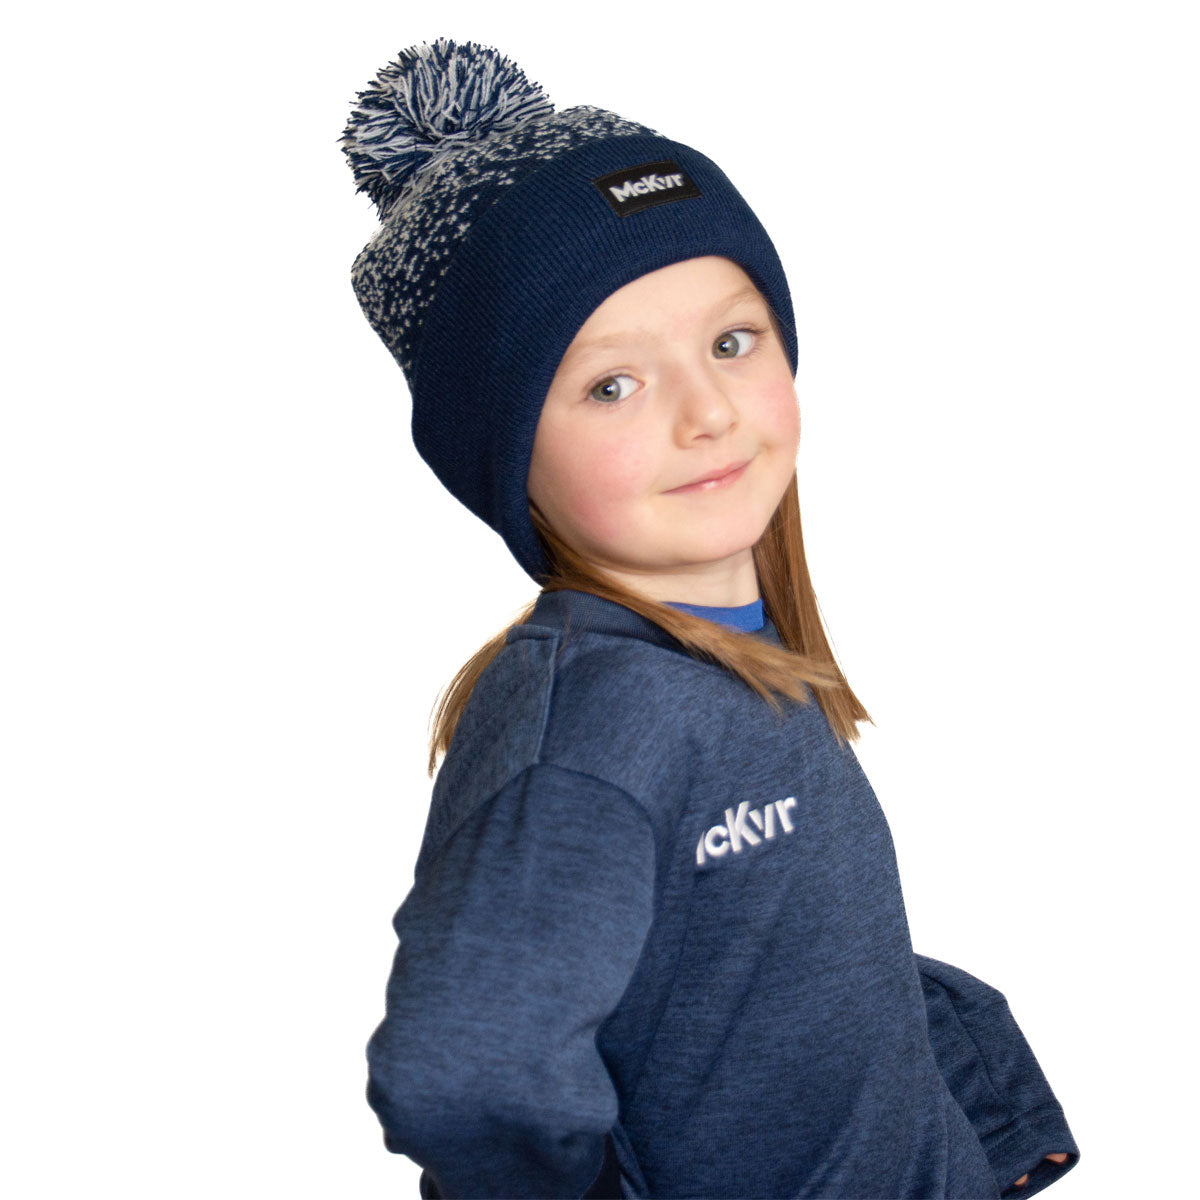 Mc Keever Core 22 Bobble Hat - Youth - Navy/Grey